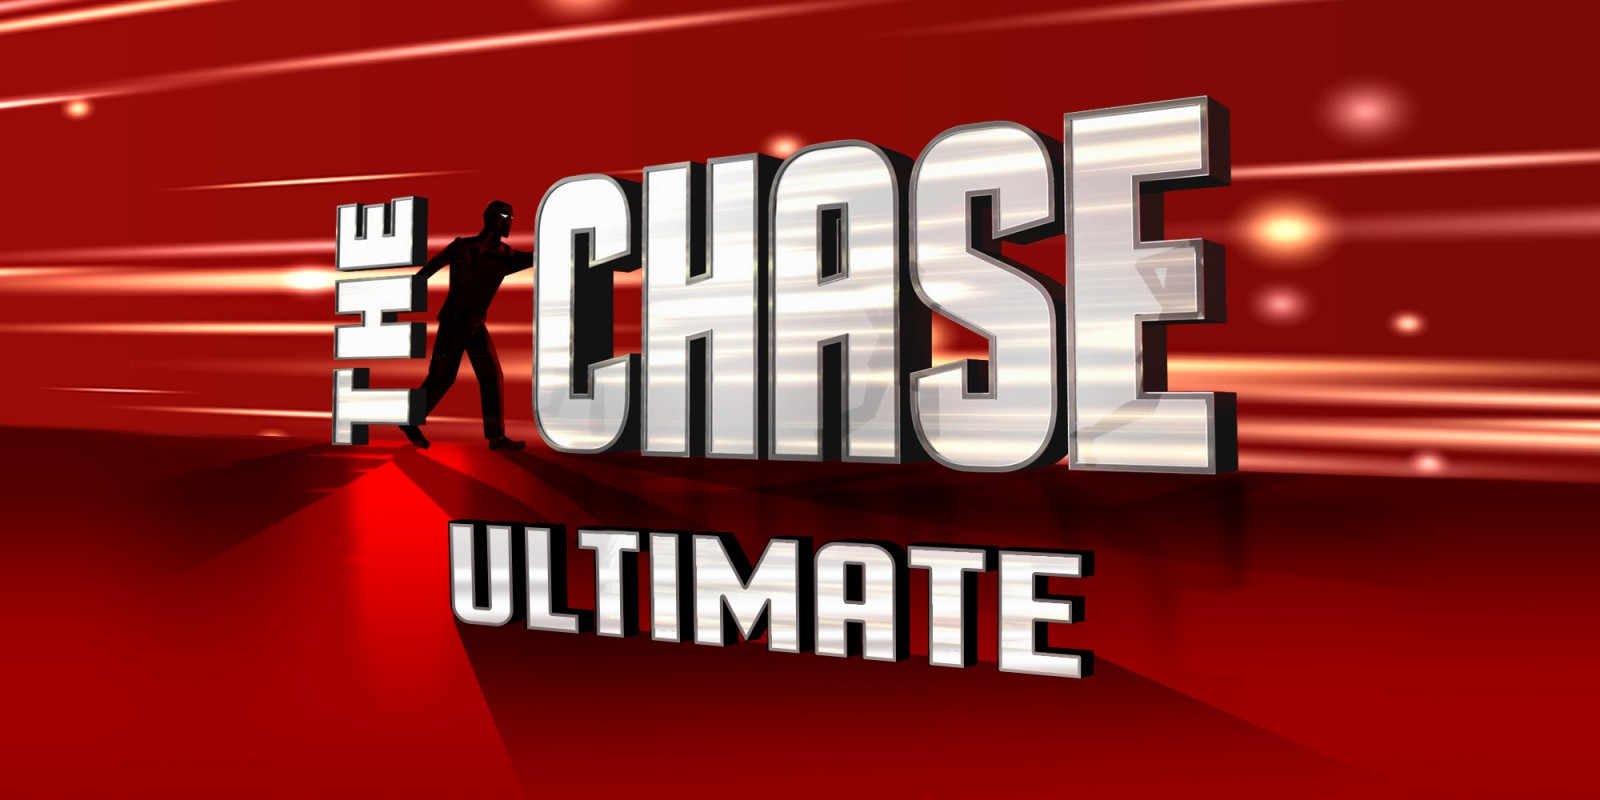 The Chase: Ultimate Edition